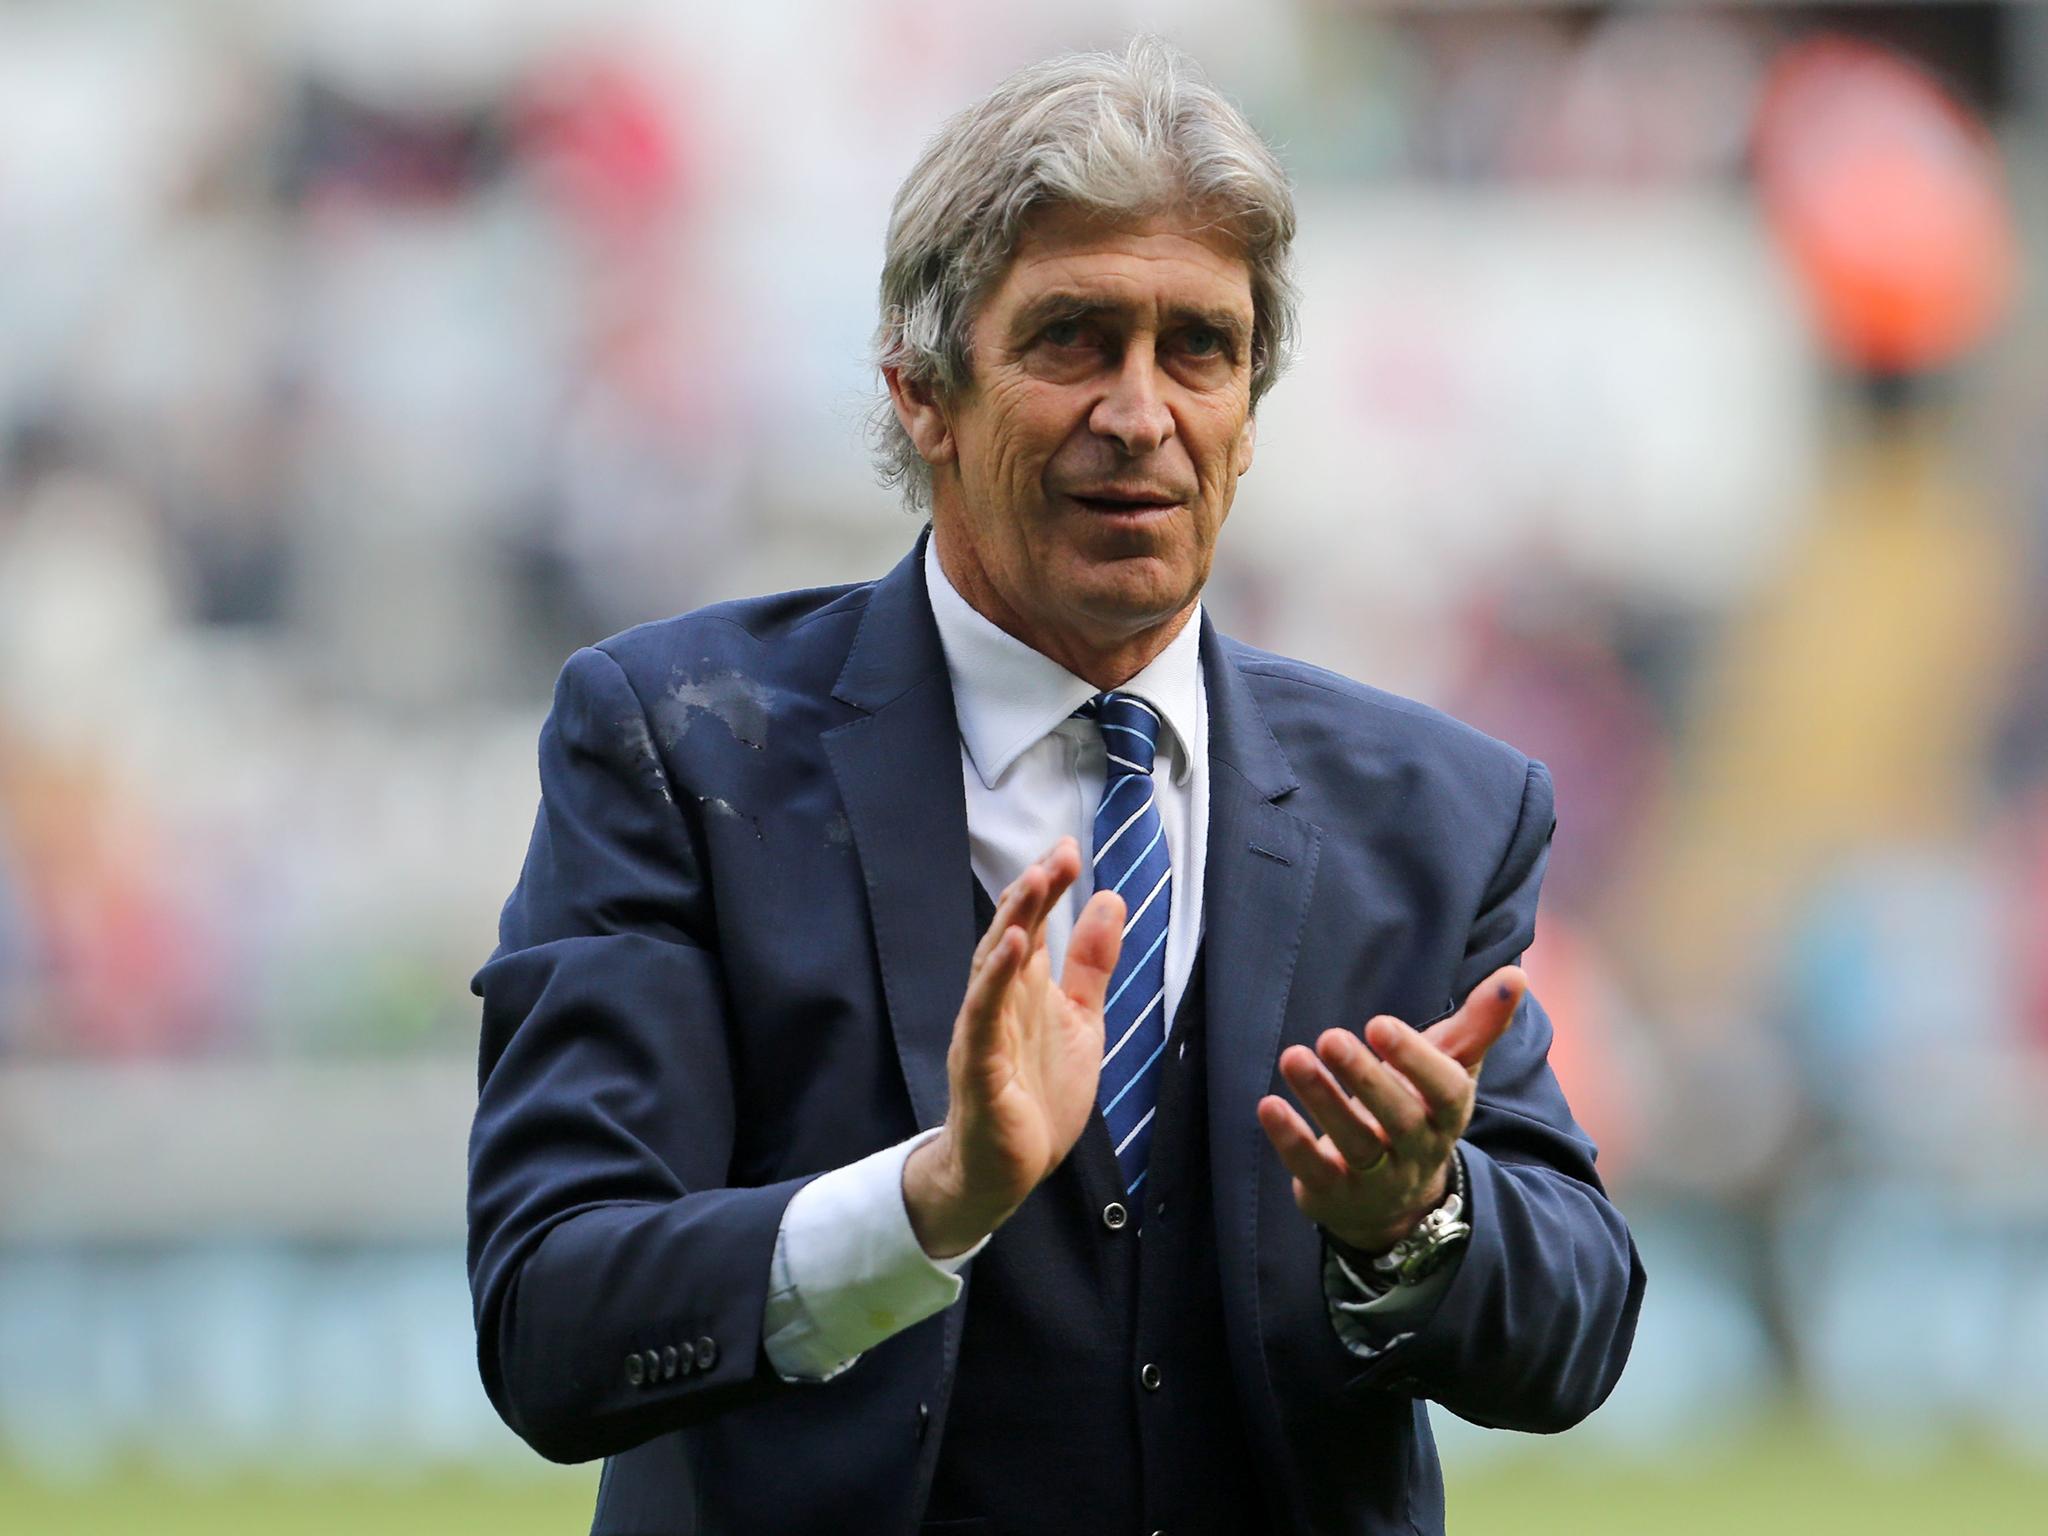 Manuel Pellegrini is being strongly linked with the vacant West Ham job